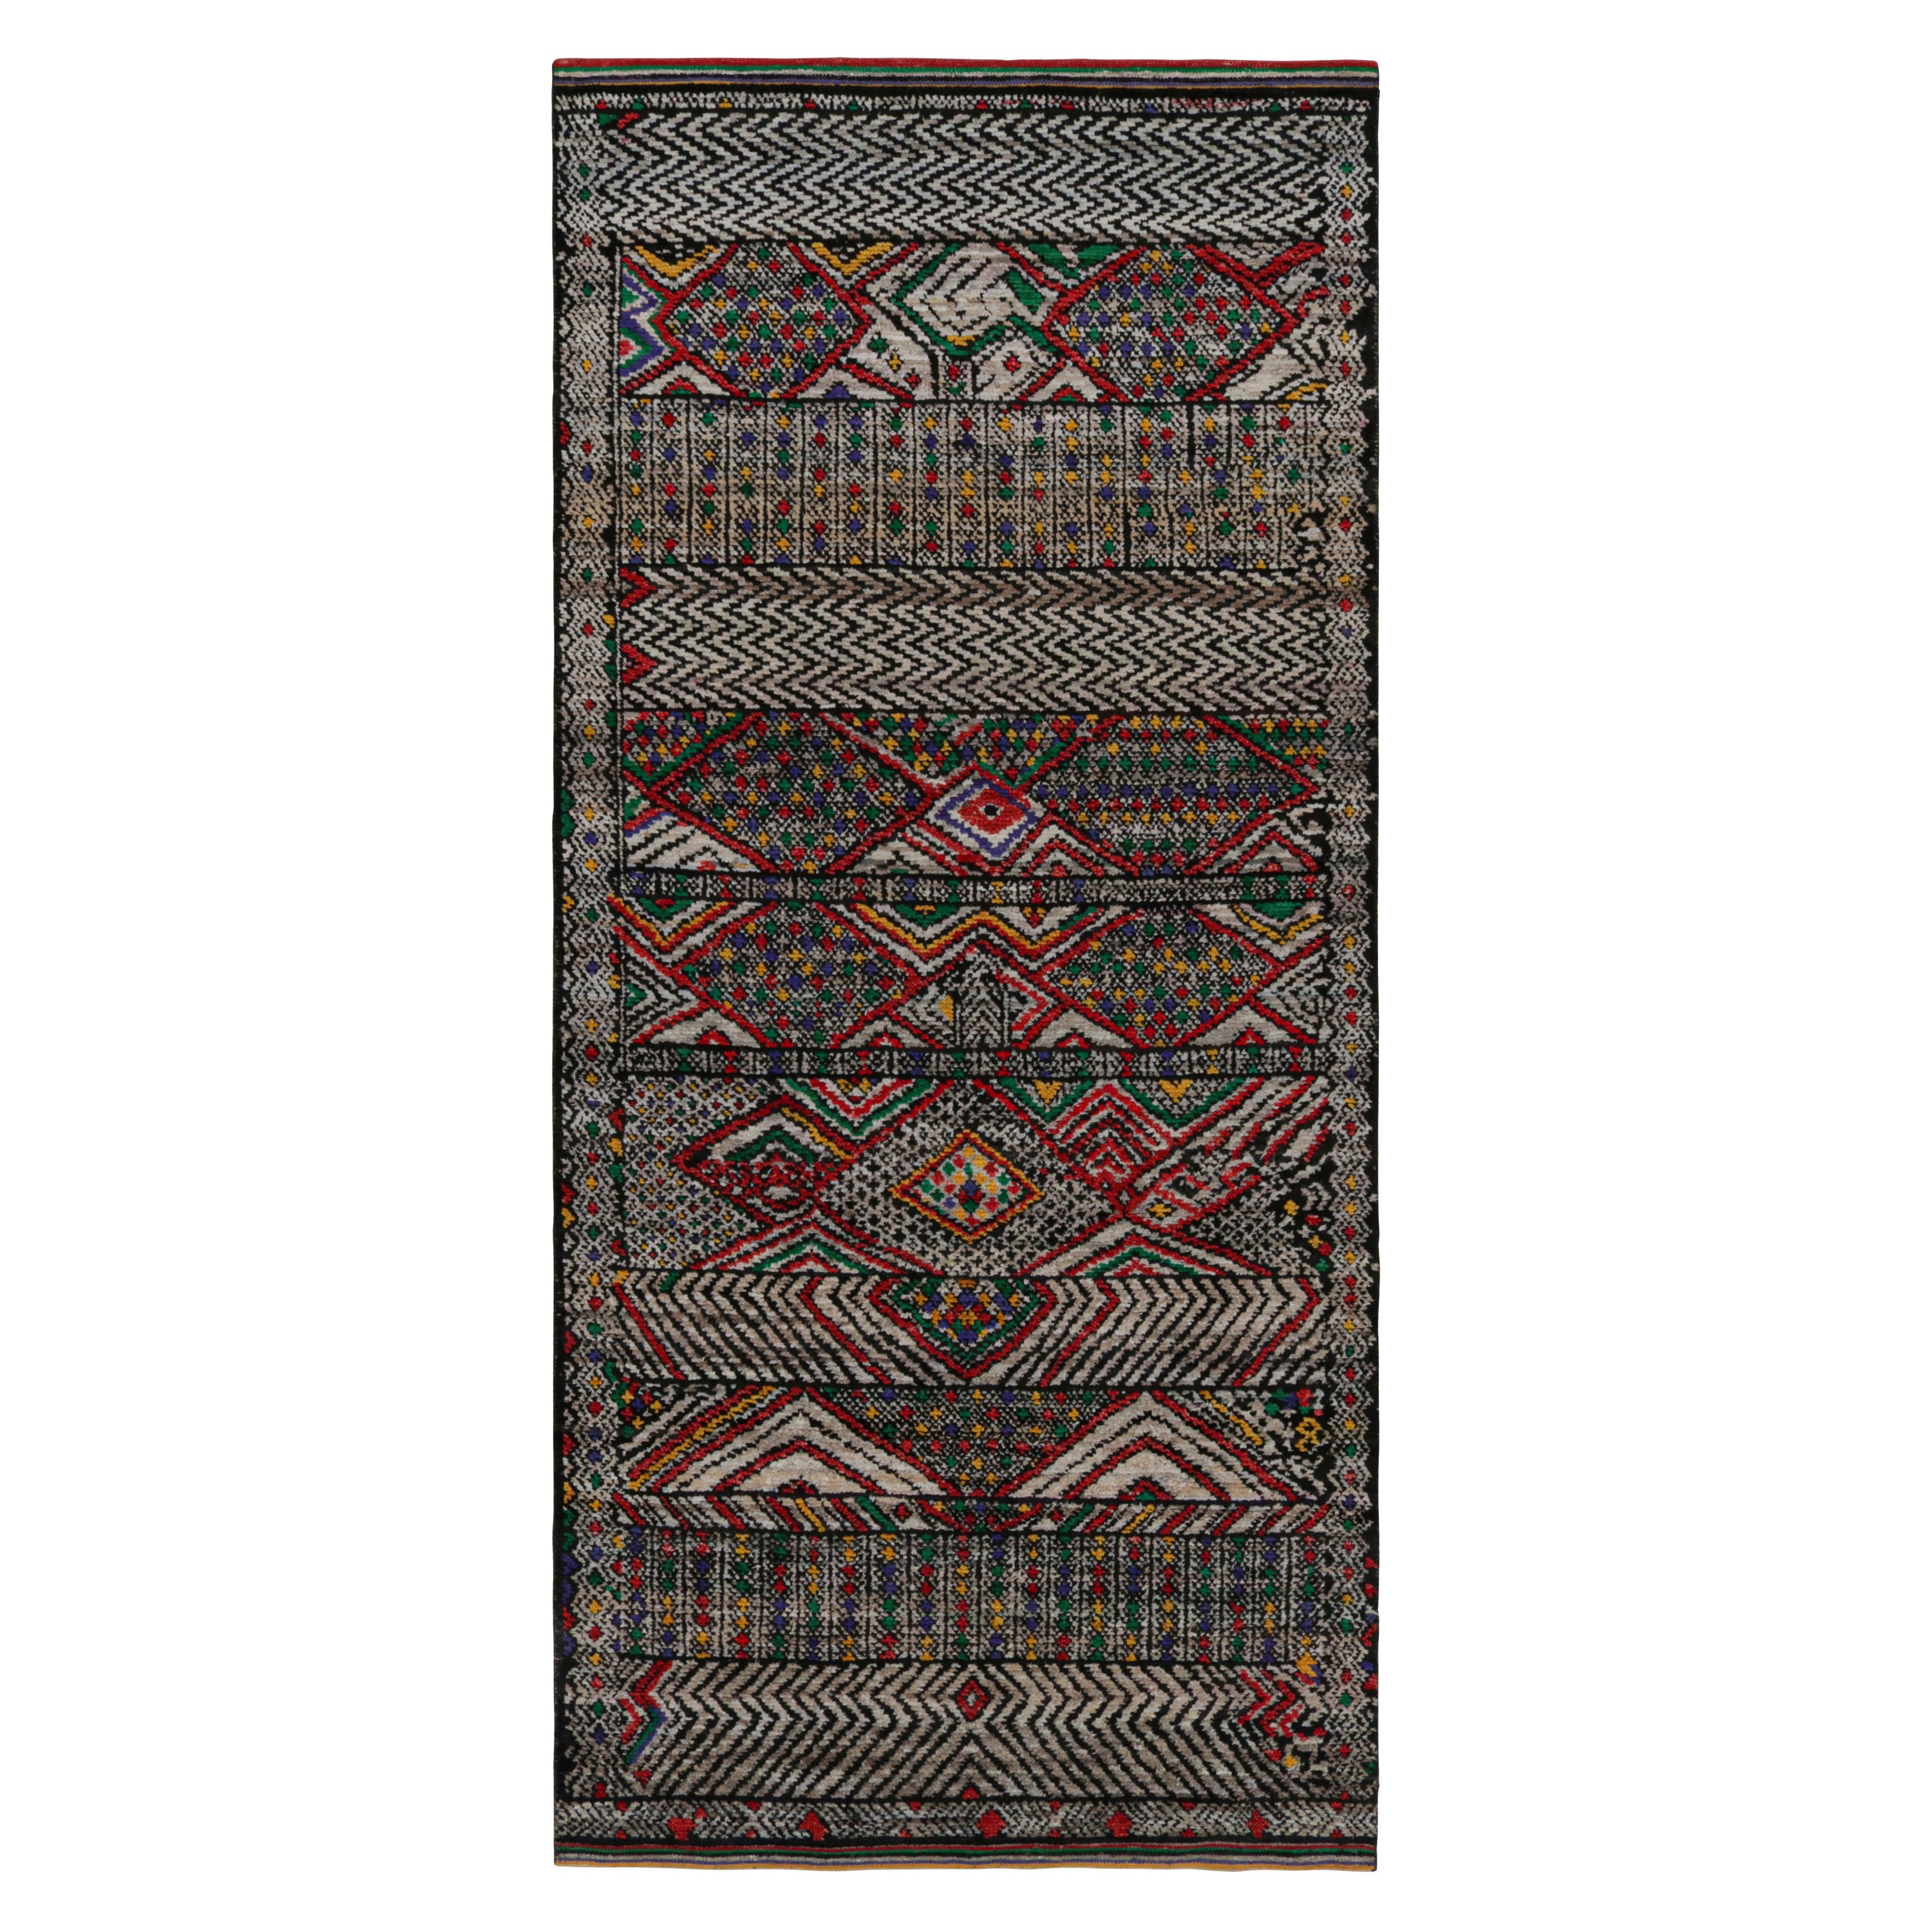 Rug & Kilim's Modernity Moroccan Style Rug with Polychromatic Patterns (tapis de style marocain moderne aux motifs polychromes)